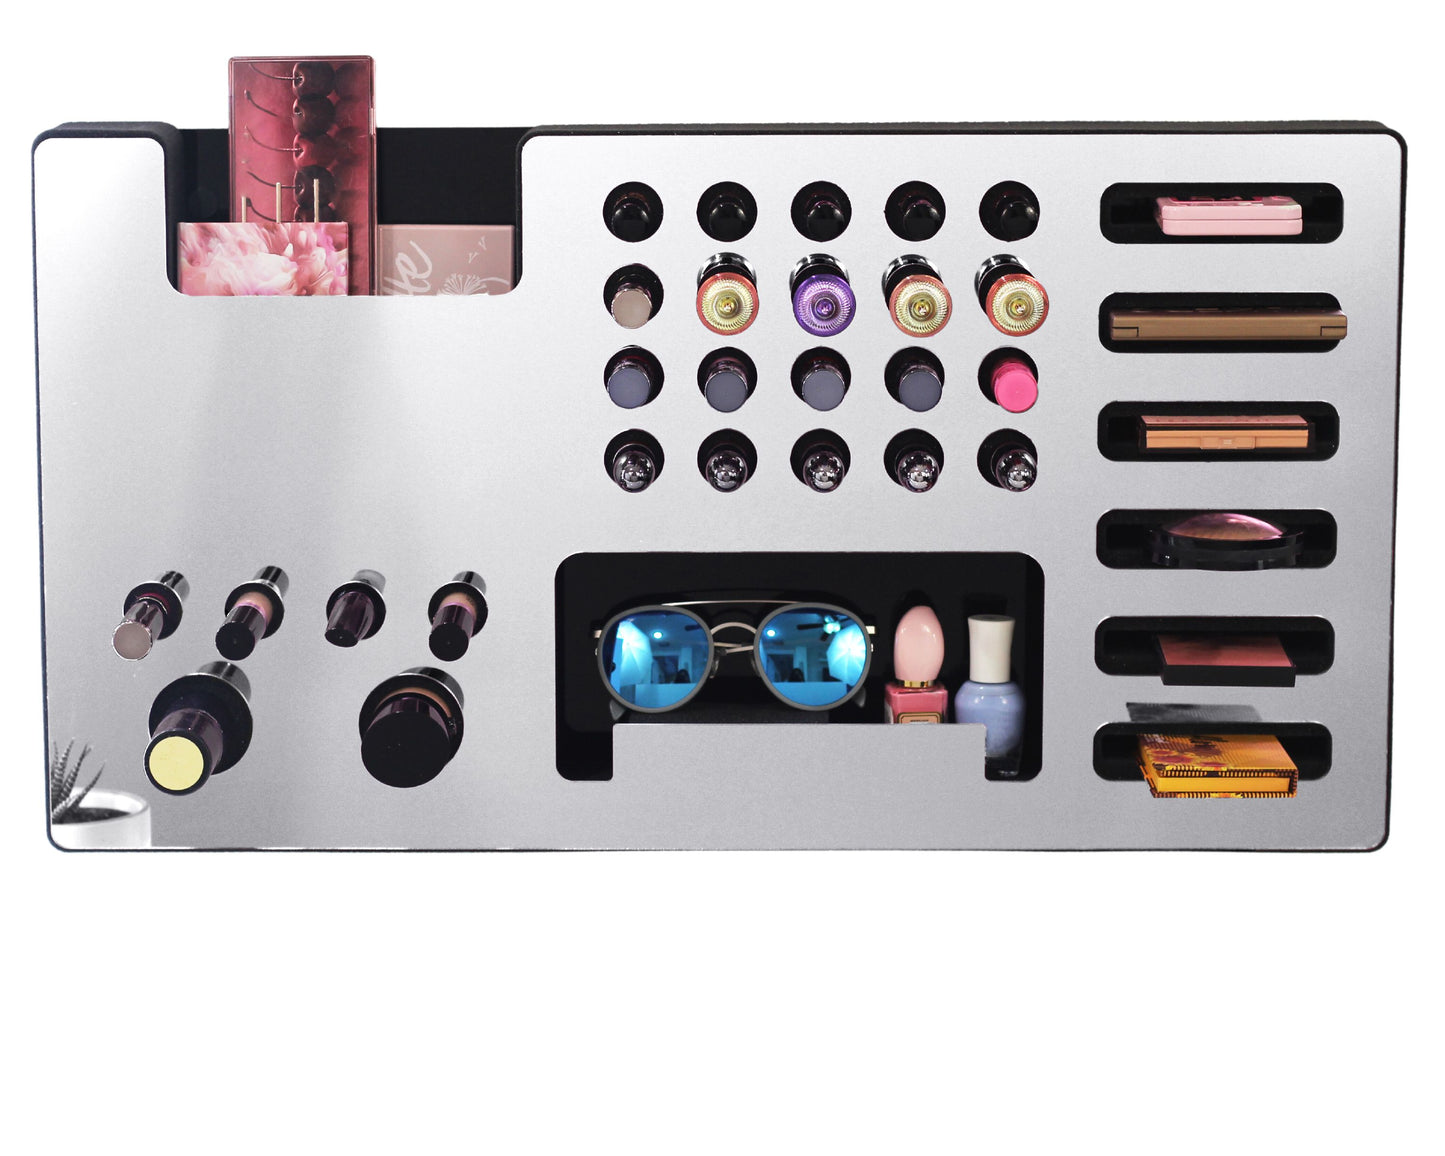 Mirror Silver Ultra Complete Makeup Solution Organizer shown mounted on the wall holding lipsticks, lip glosses, nail polishes, brushes, sunglasses and more by keeping items accessible and off of the counter. Shown next to a makeup vanity with samples of suggested items the organizer can hold. Shown with a white background.